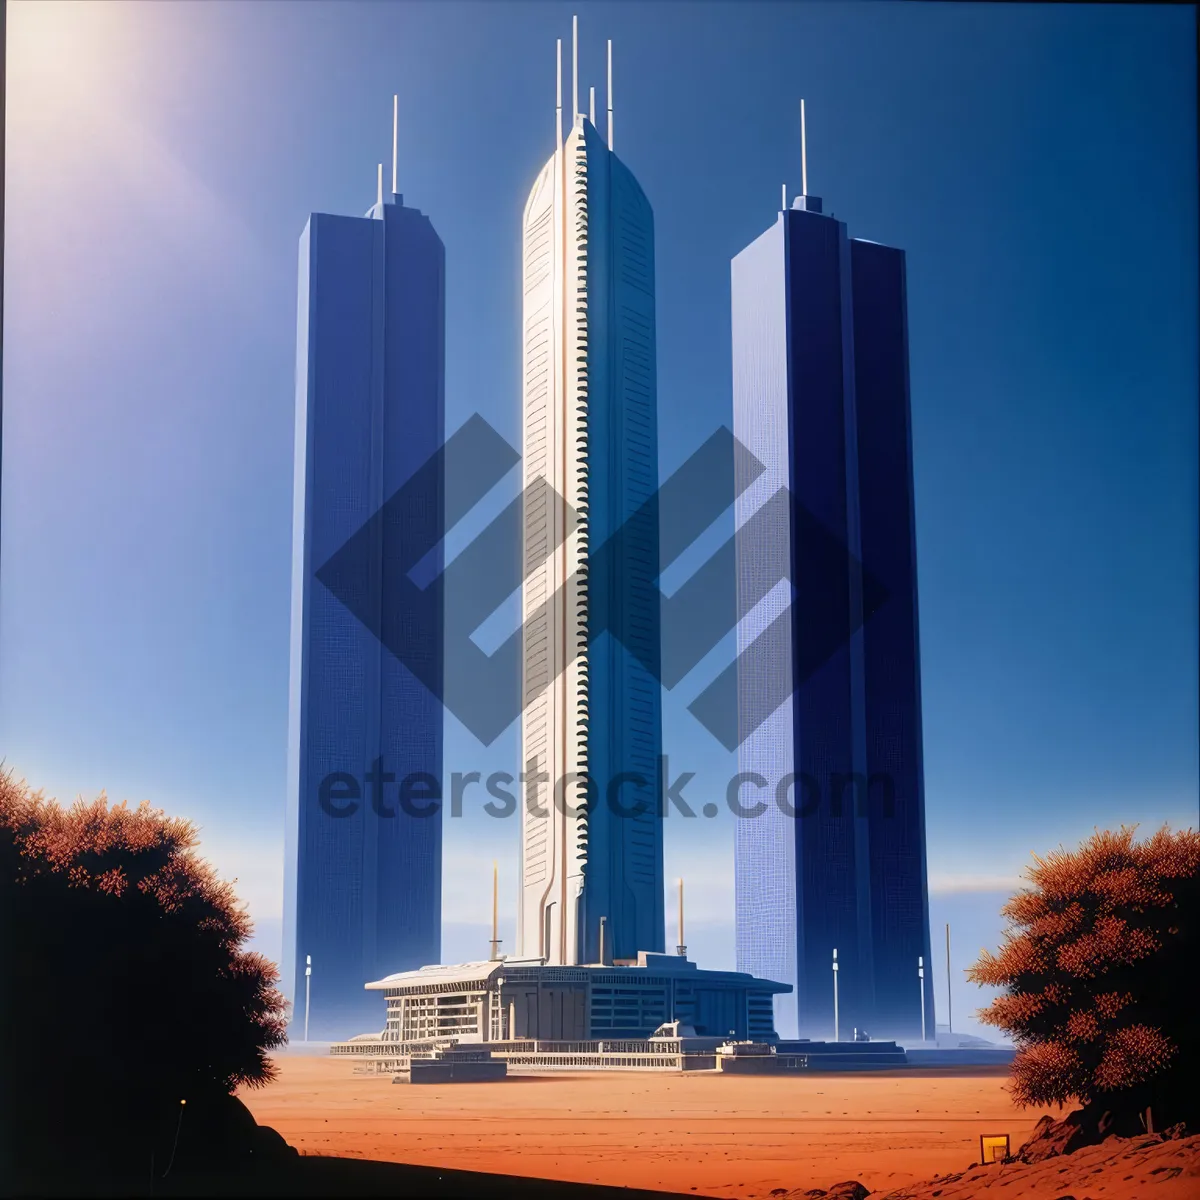 Picture of Urban Skyline: Iconic Modern Cityscape with Tall Skyscrapers